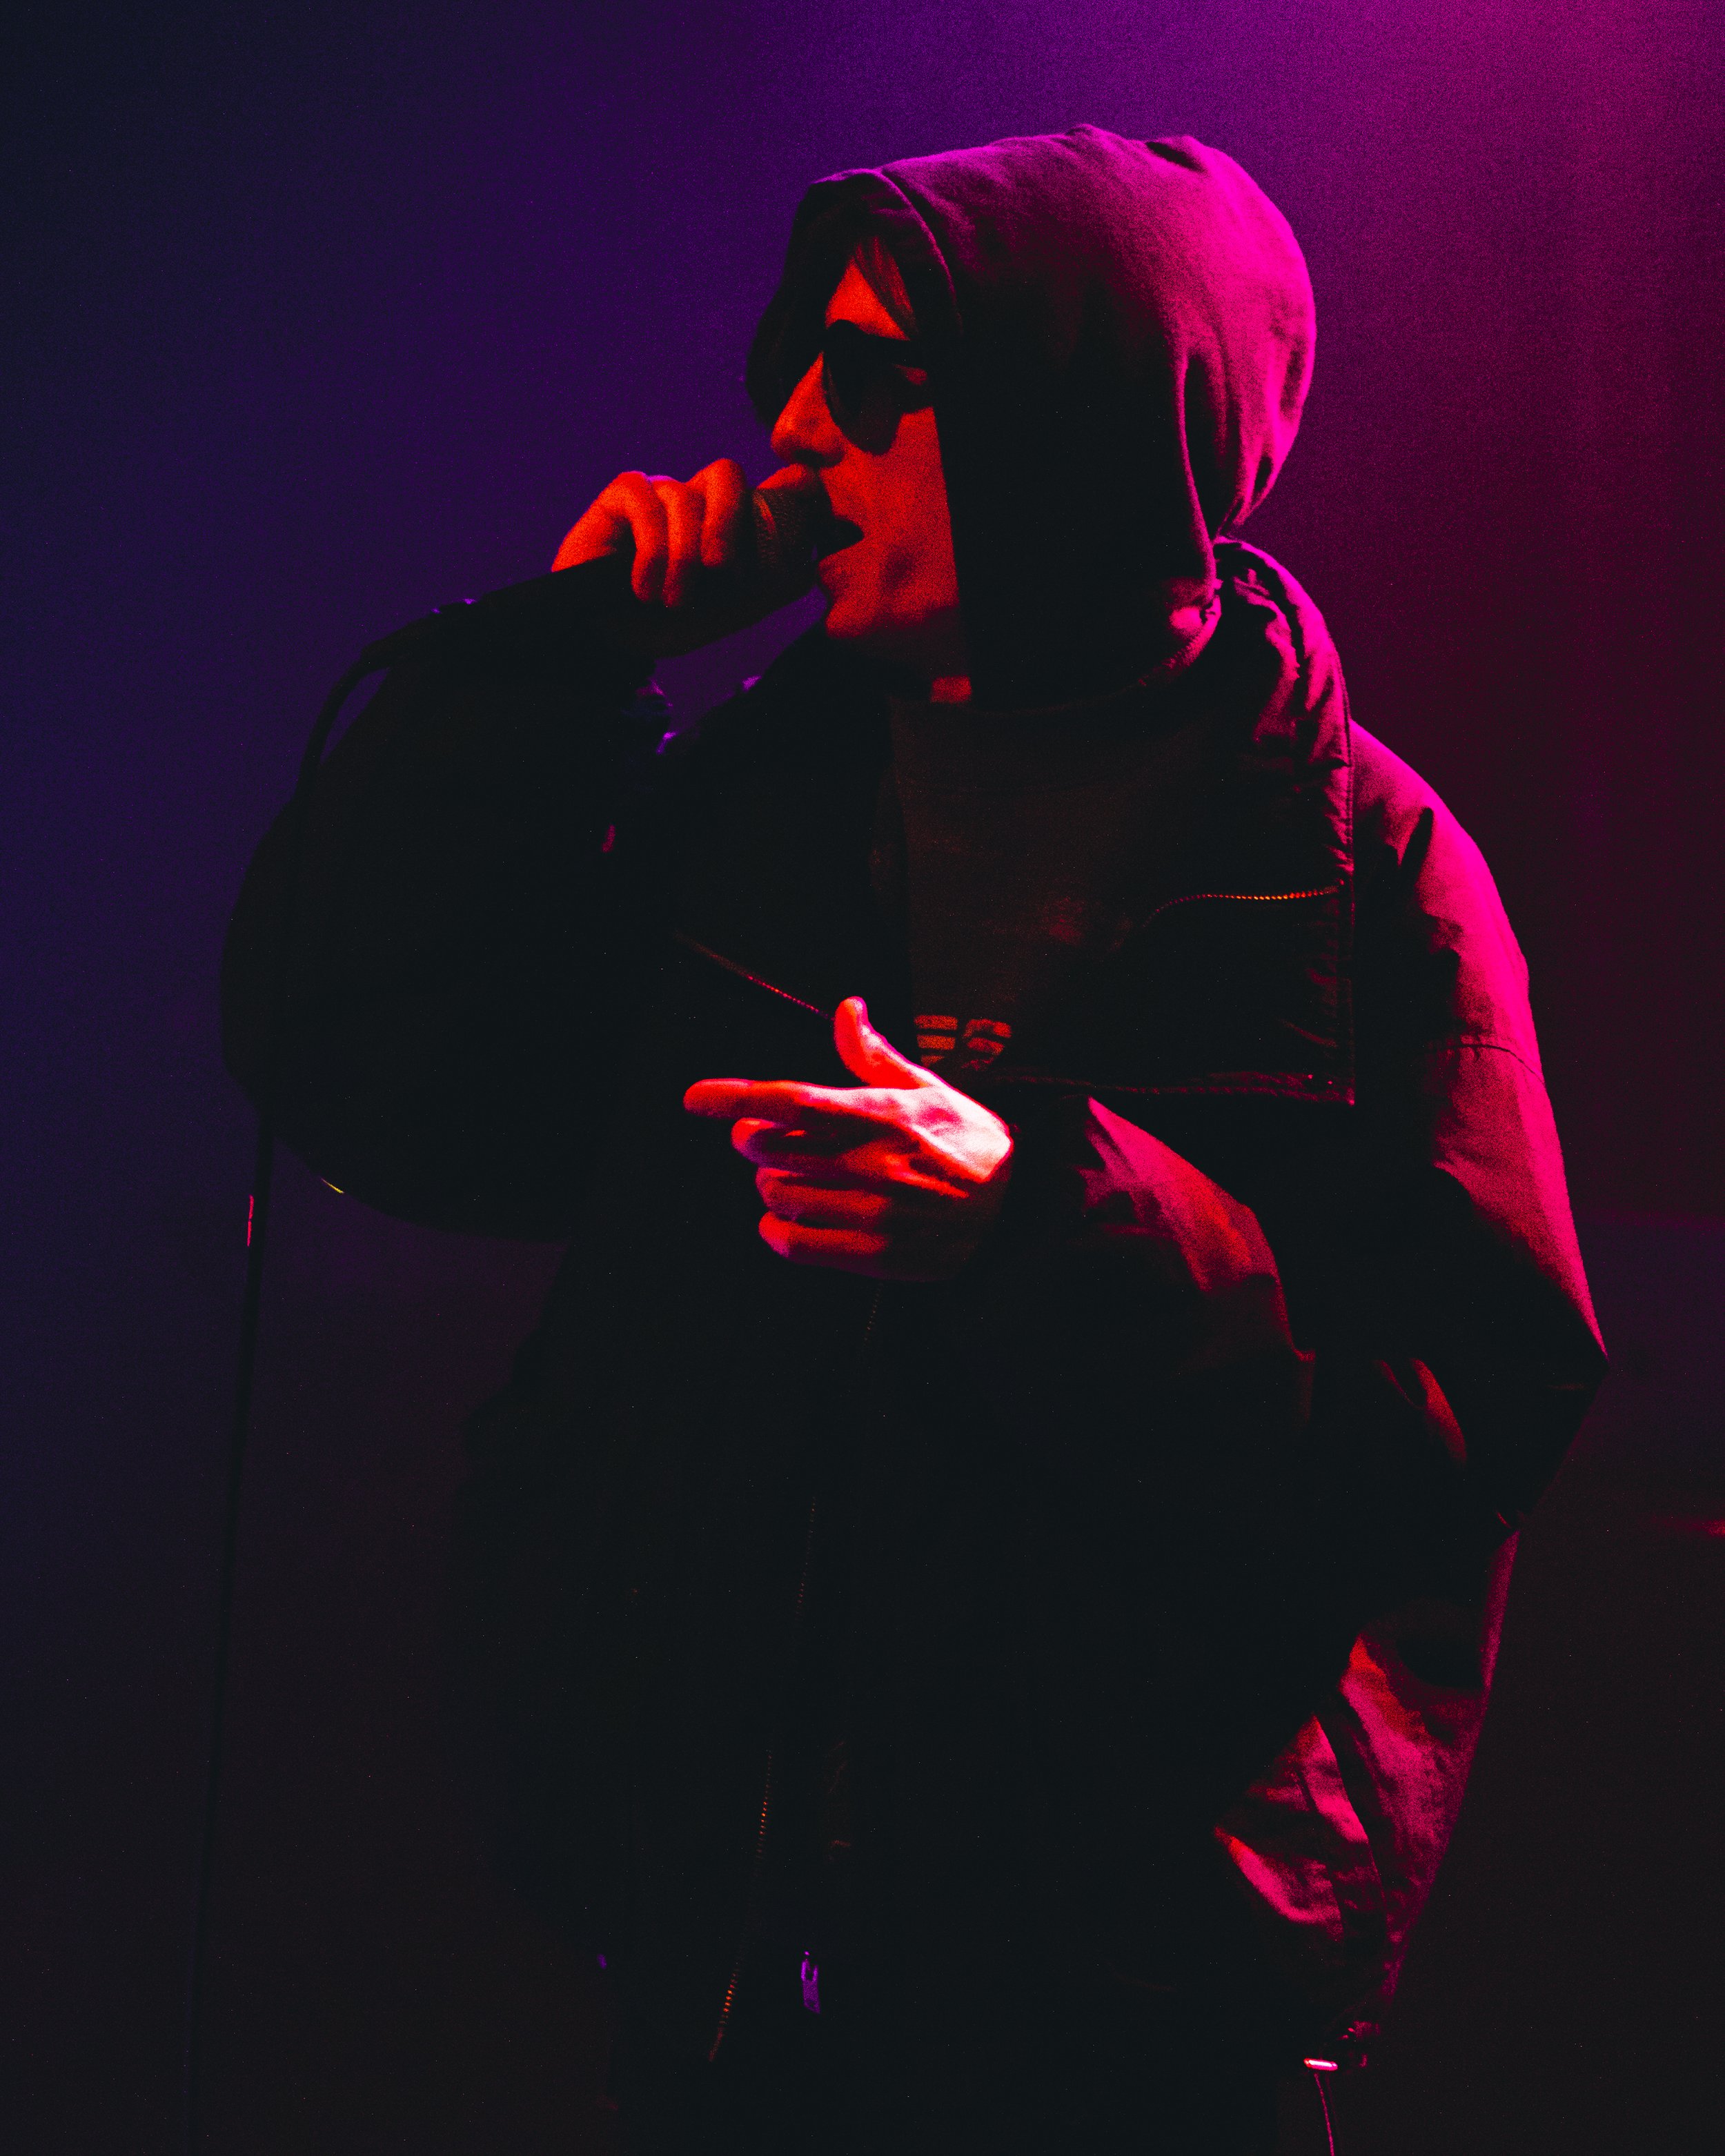 Wicca Phase Springs Eternal -  WINTER TOUR 2022 - The Bluebird Theater - Denver, Colorado - Friday, December 16, 2022- PHOTO BY Mowgli Miles of Interracial Friends - PHOTO BY Mowgli Miles of Interracial Friends-13.JPG